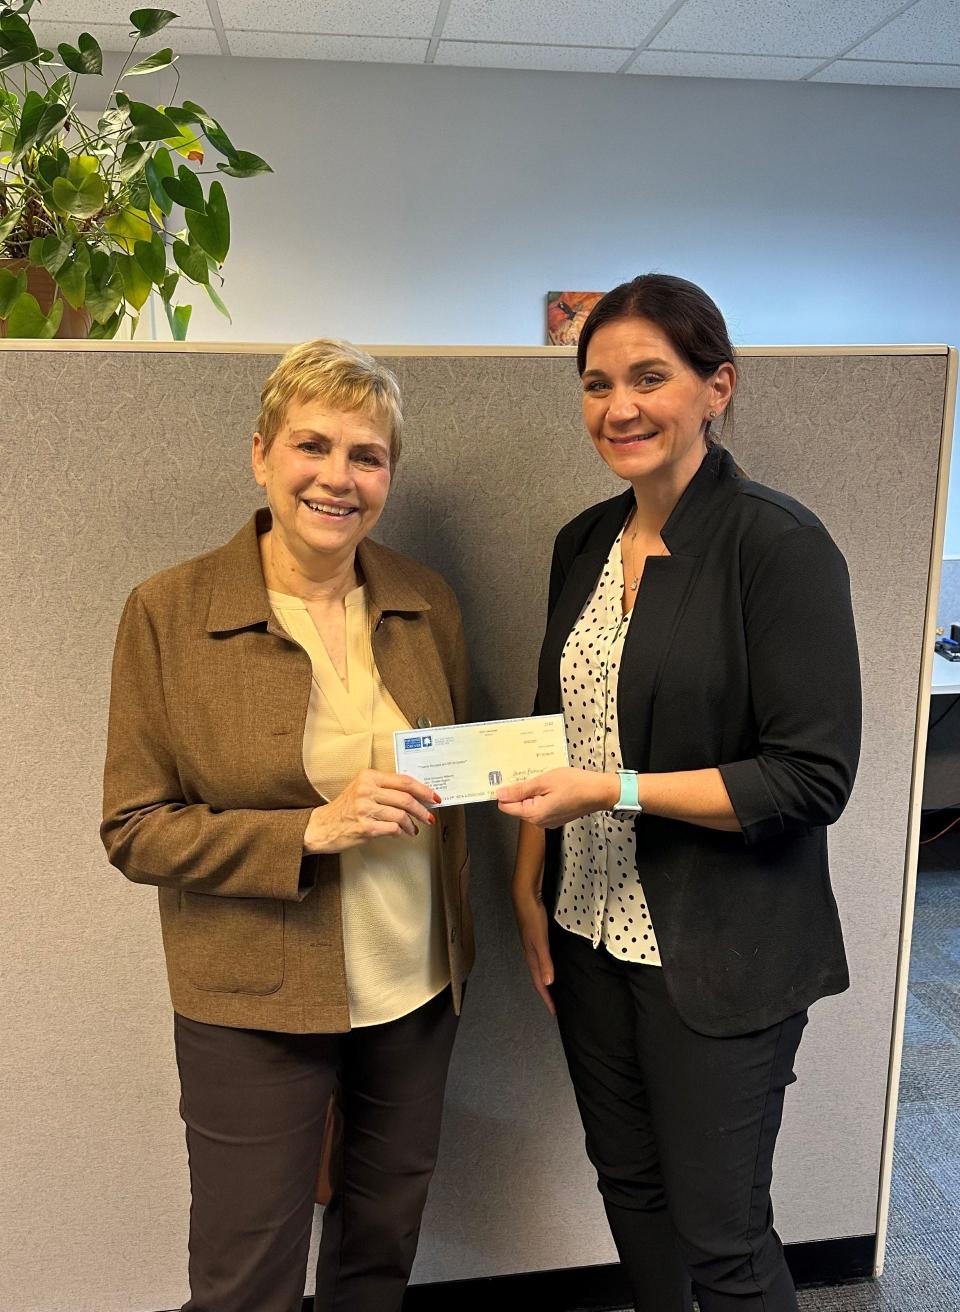 Kathleen Russeau, executive director of Community Foundation of Monroe County (left), is shown with Christi Rogers, director of Child Advocacy Network (CAN Council) of Monroe County. CAN Council was one of three organizations to receive Monroe Health Plan Endowment Fund grants recently.